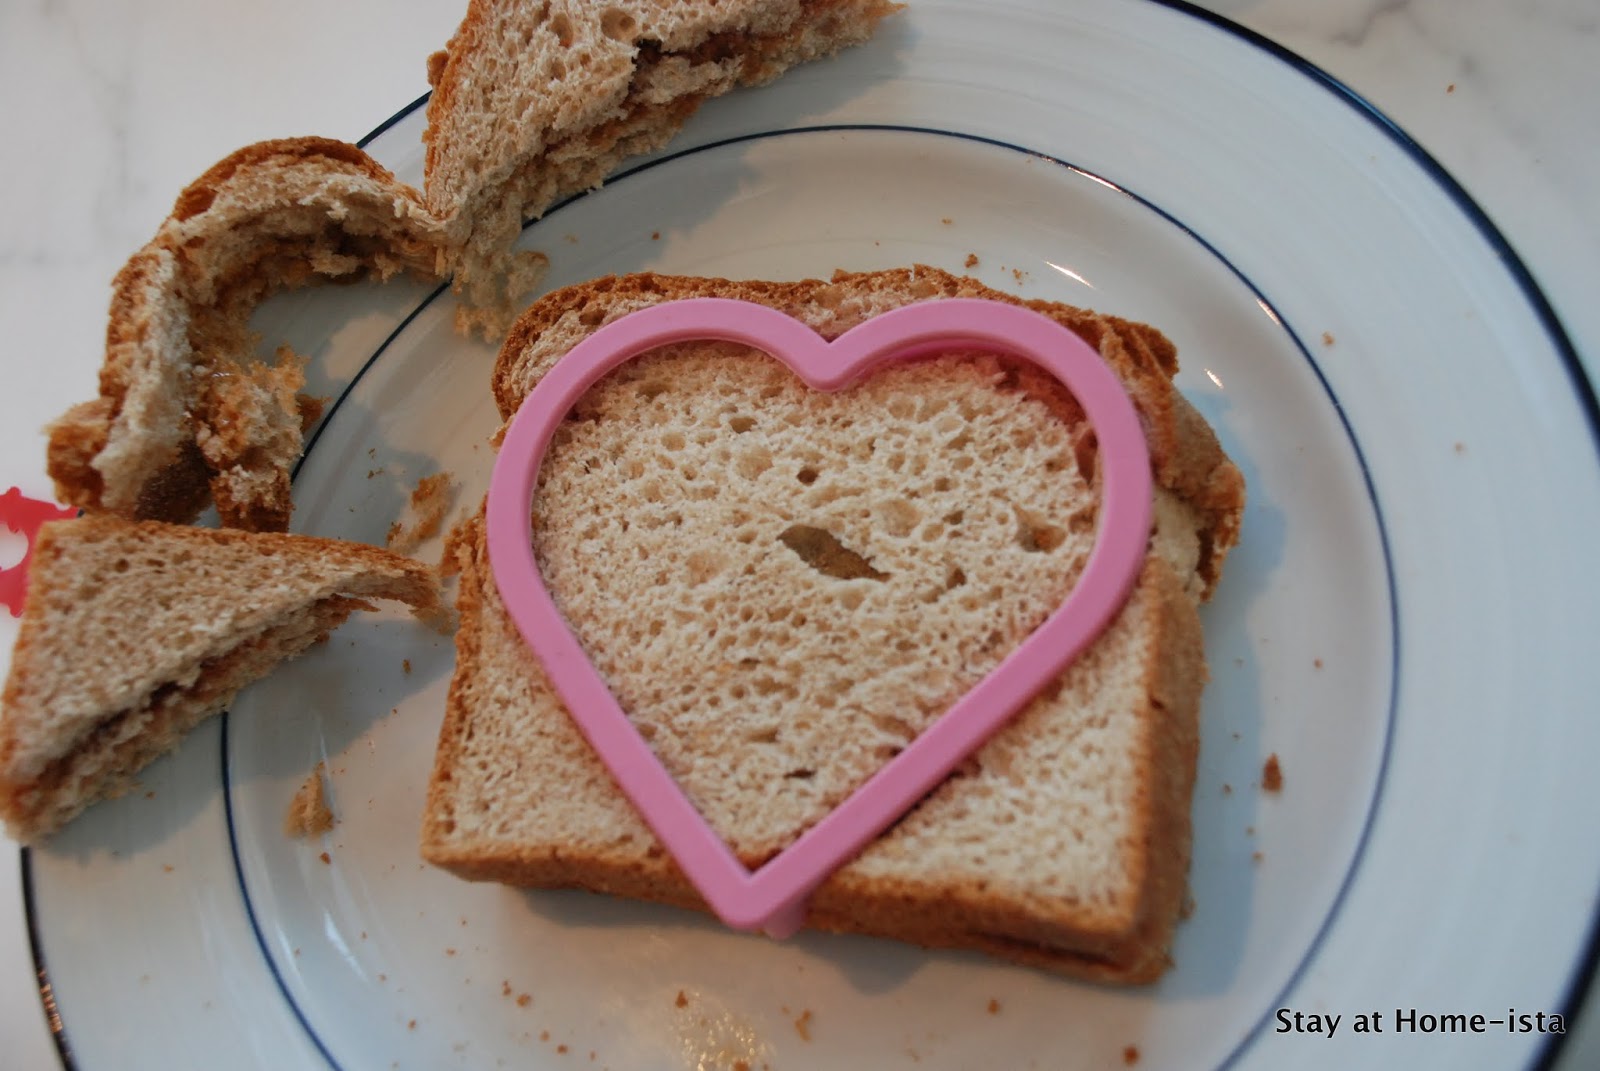 How To Make A Heart Shaped Sandwich Without A Cutter